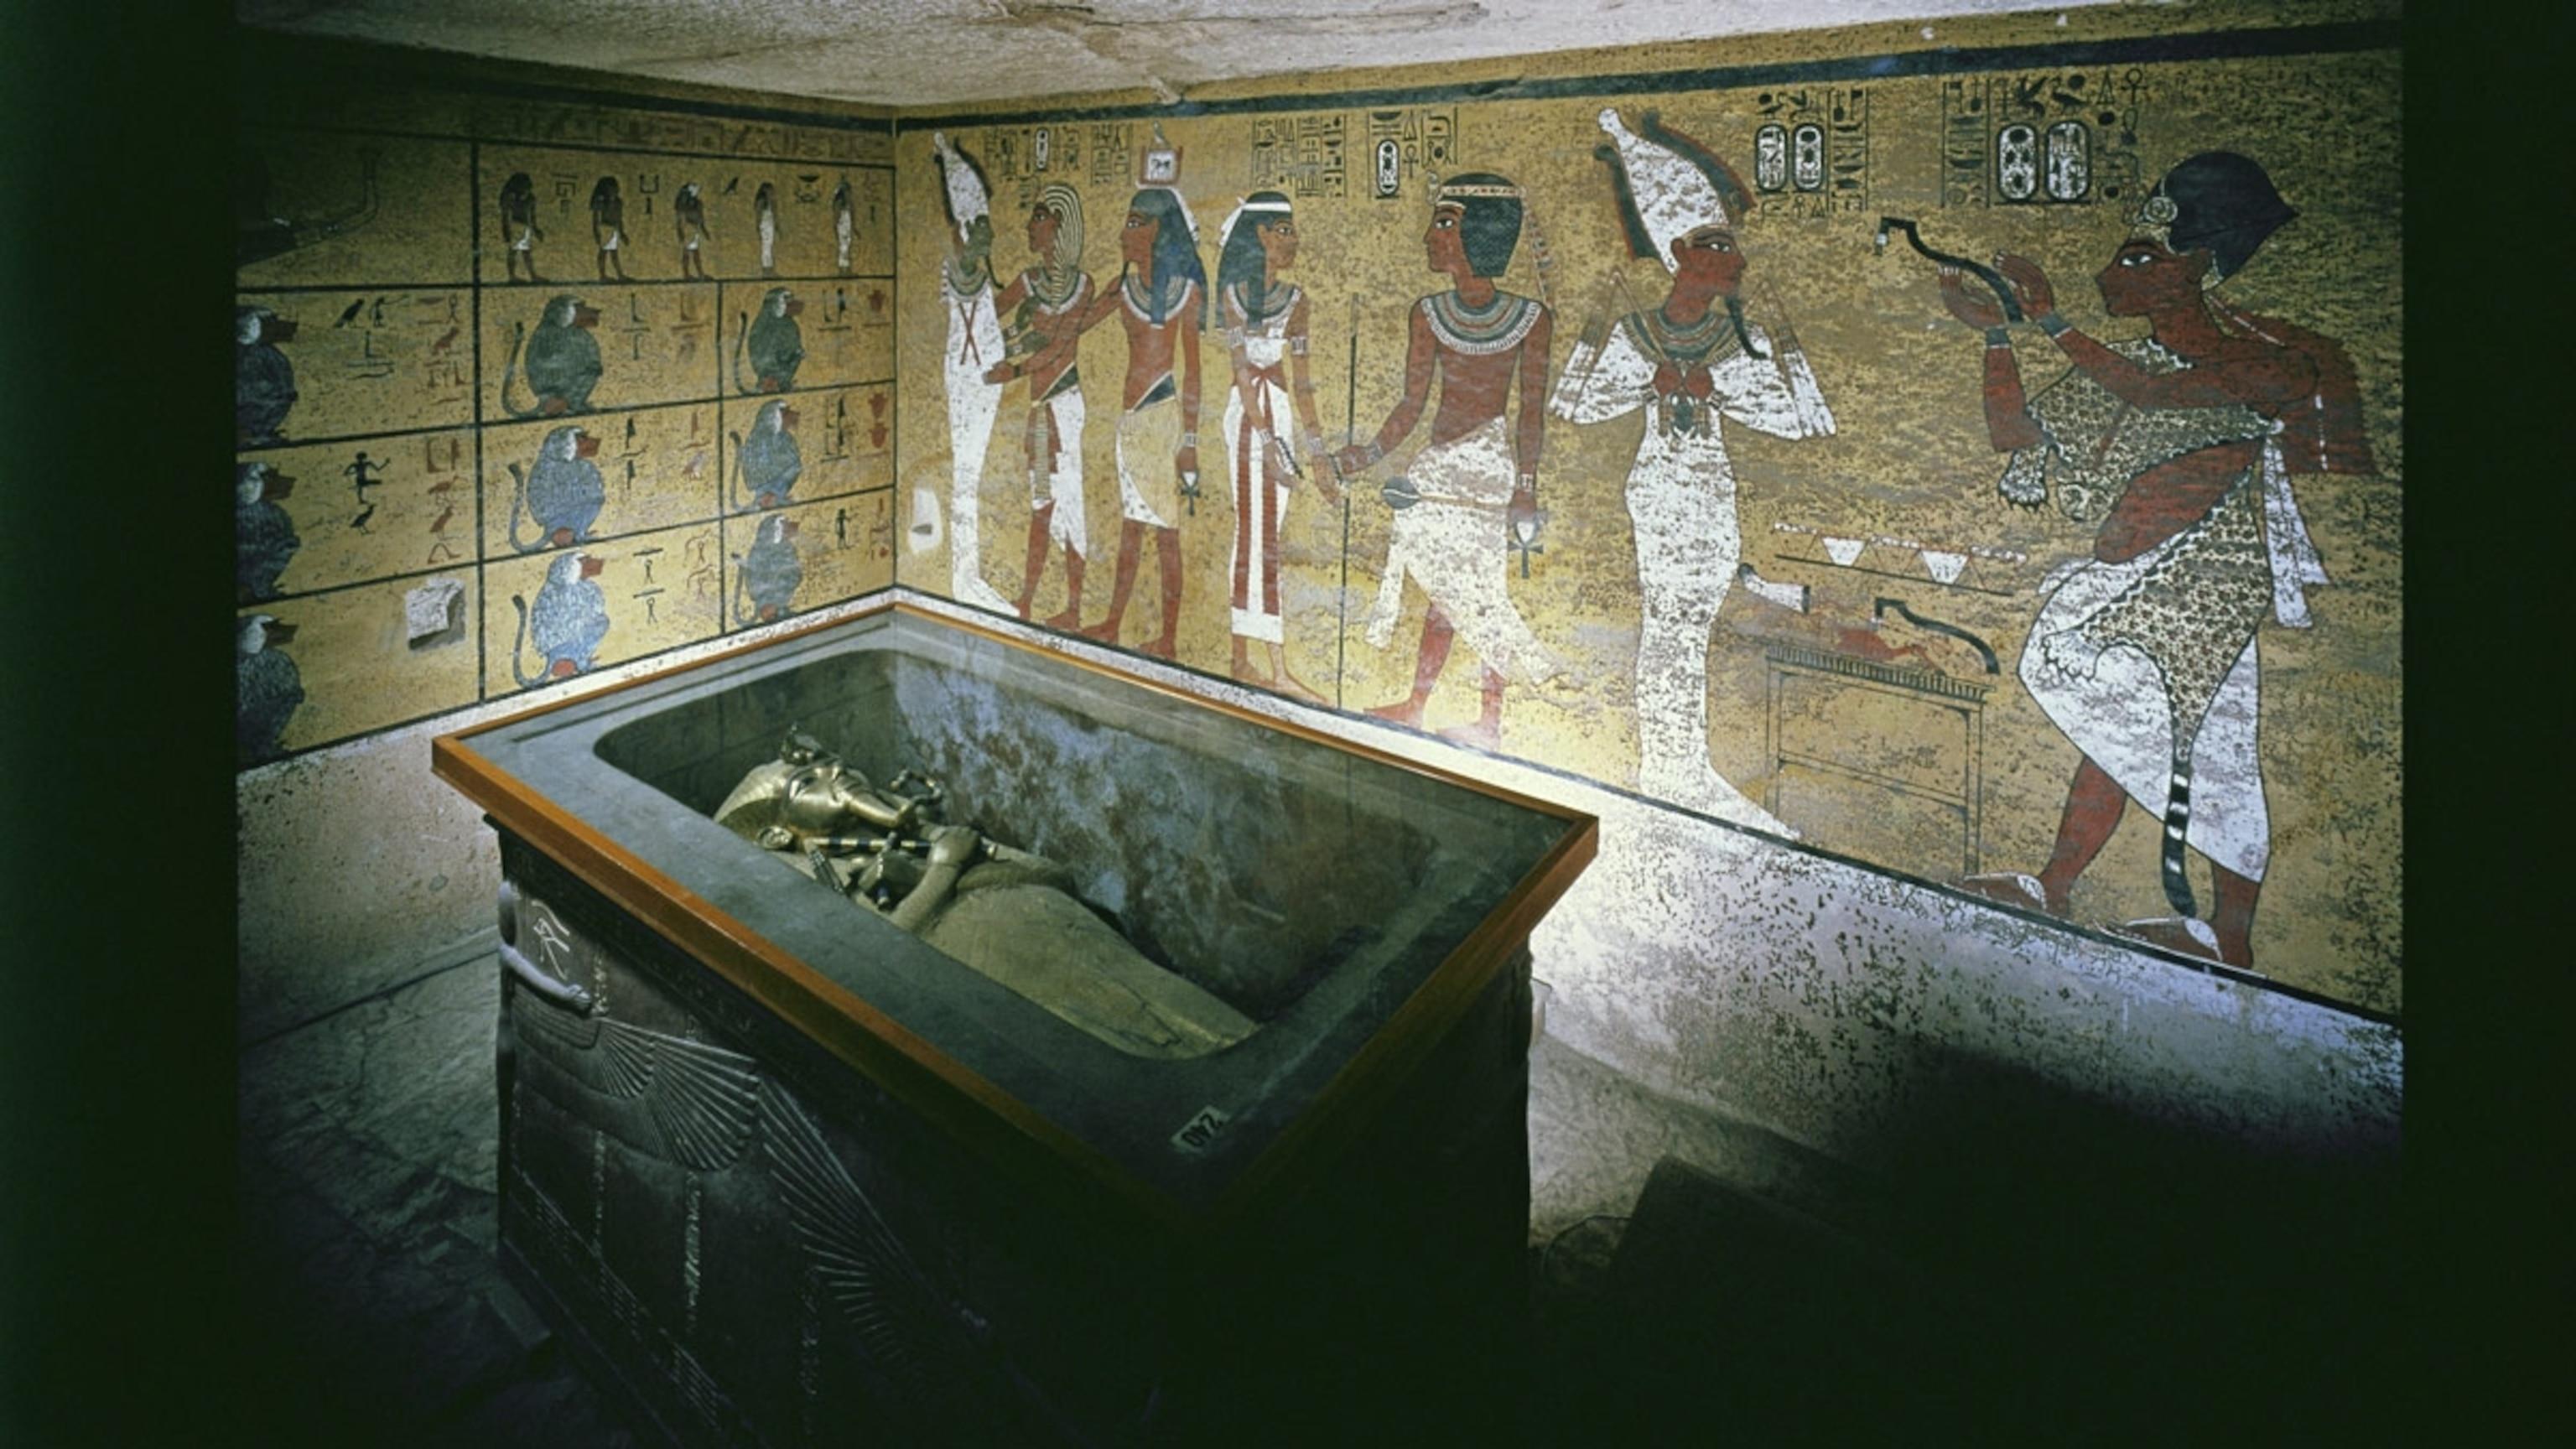 The discovery of King Tut's tomb